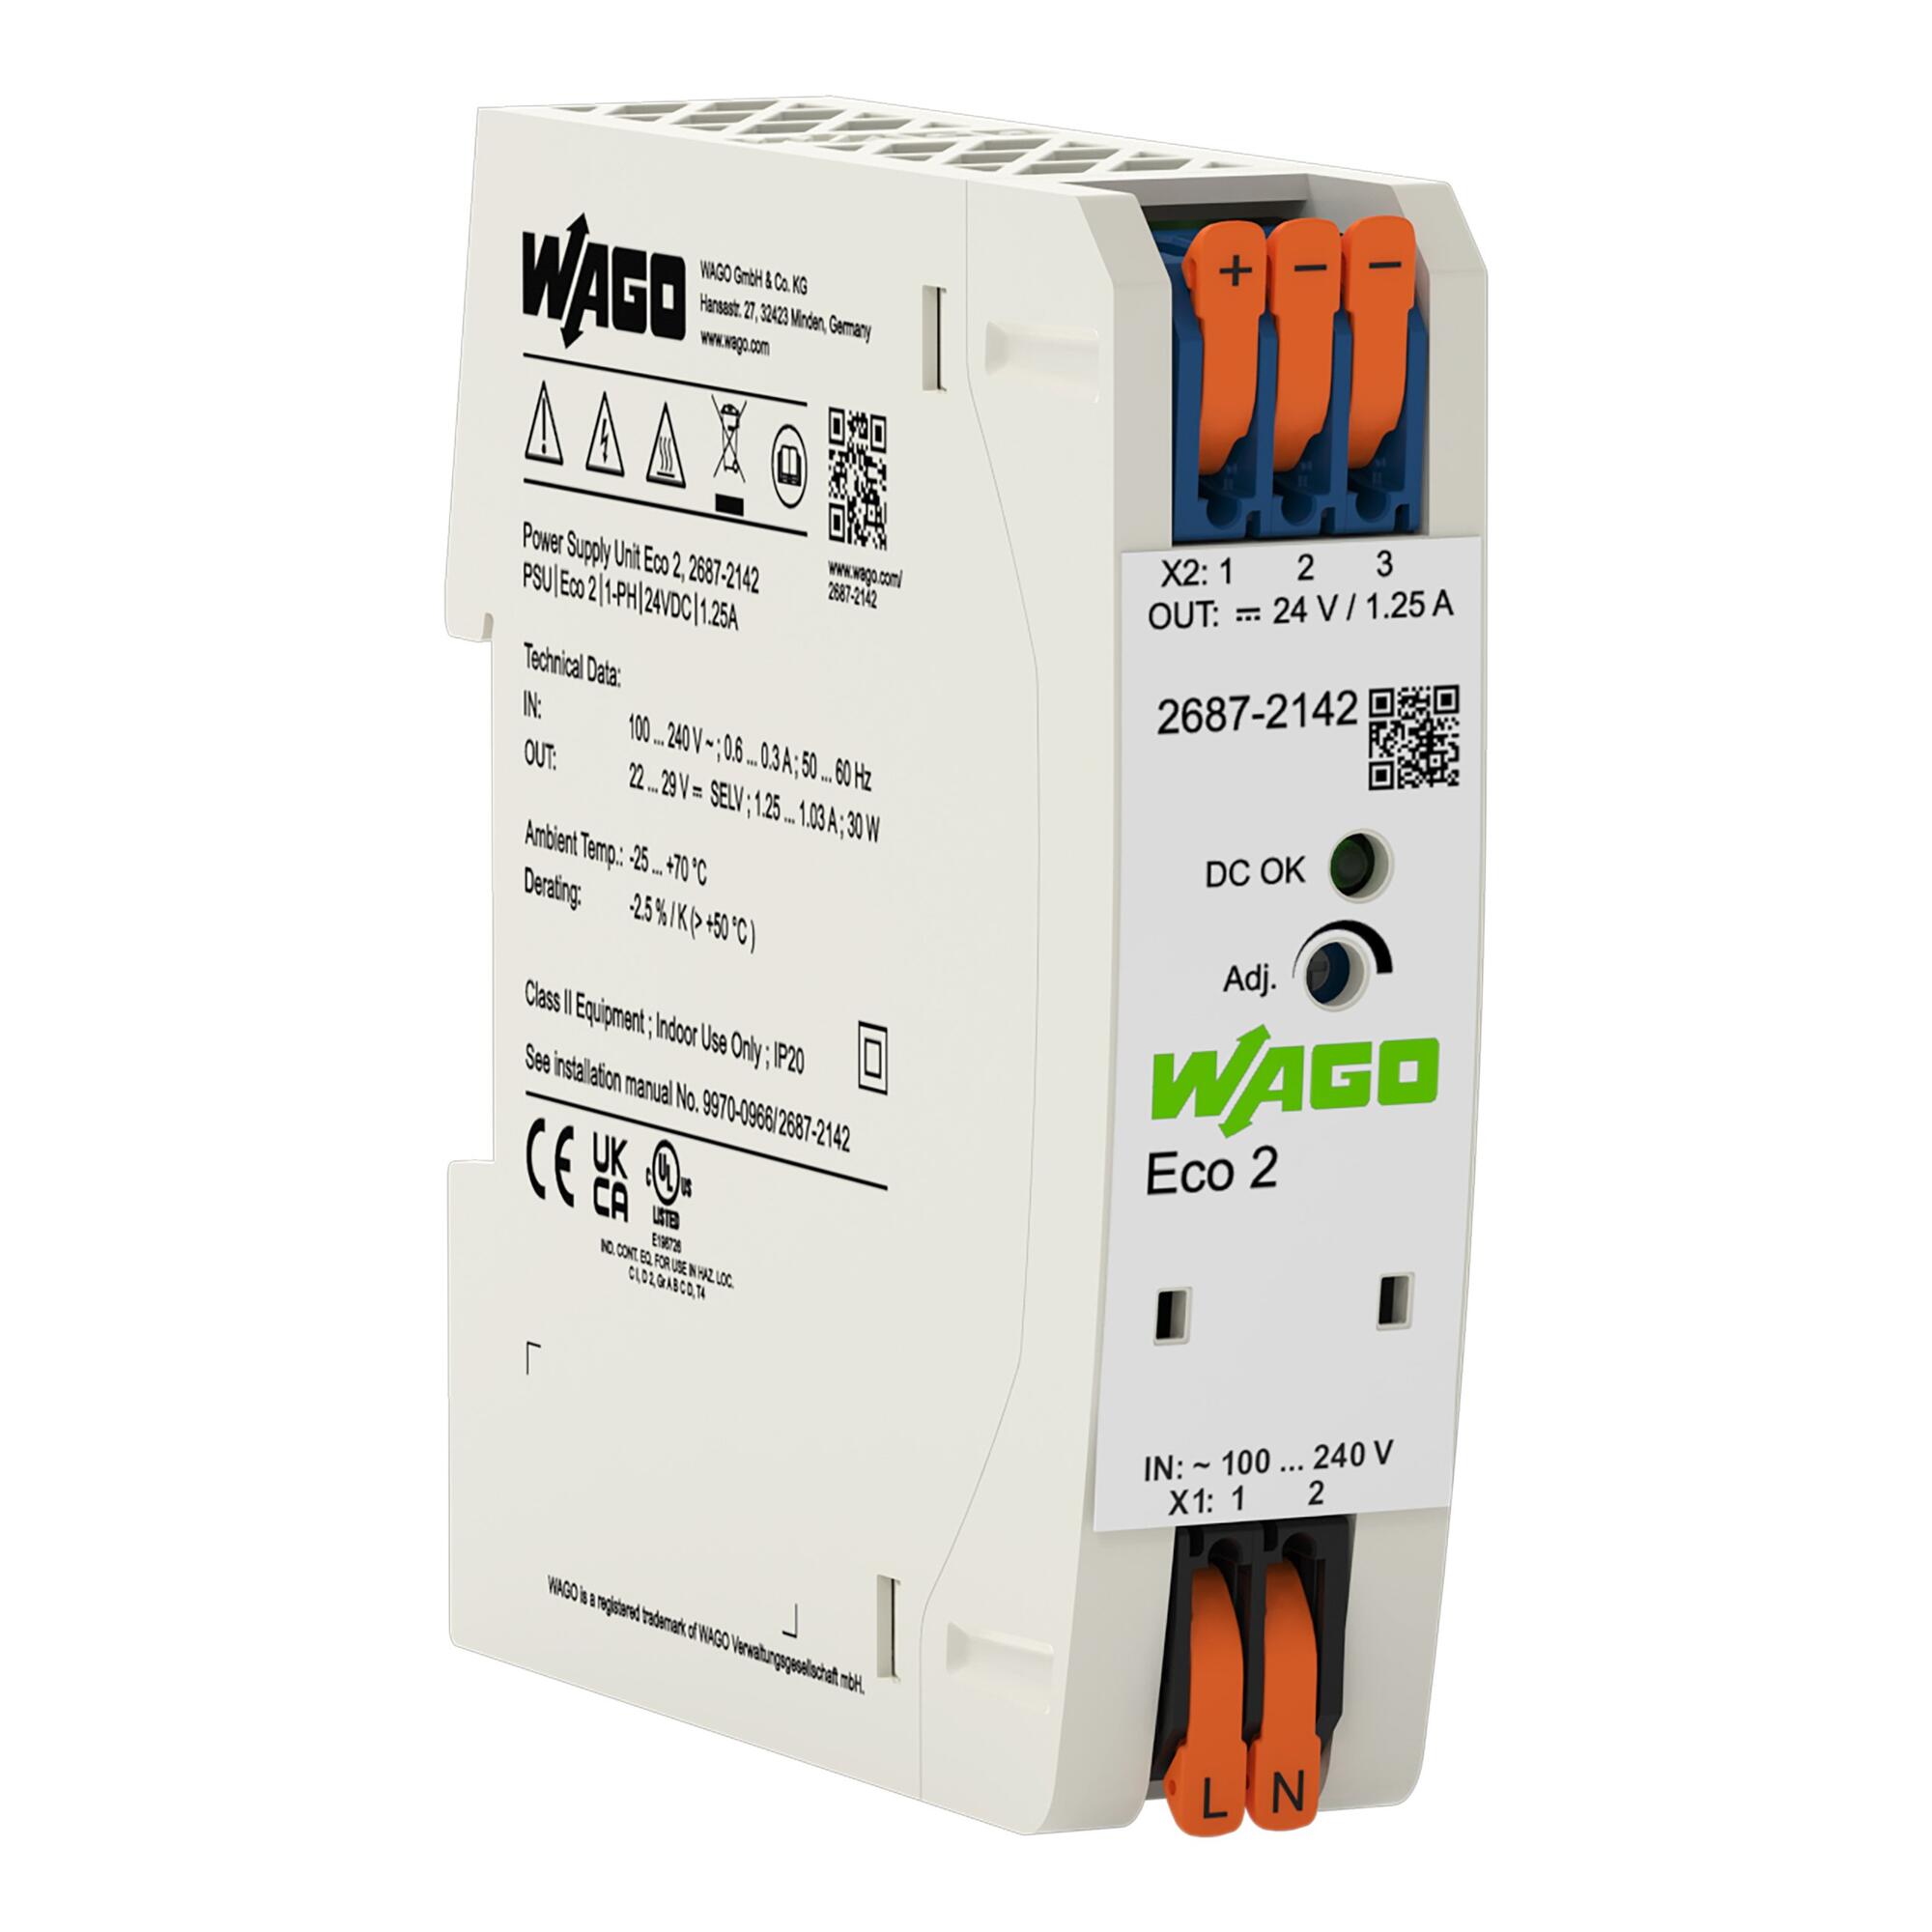 Power supply; Eco 2; 1-phase; 24 VDC output voltage; 1.25 A output current; DC-OK LED